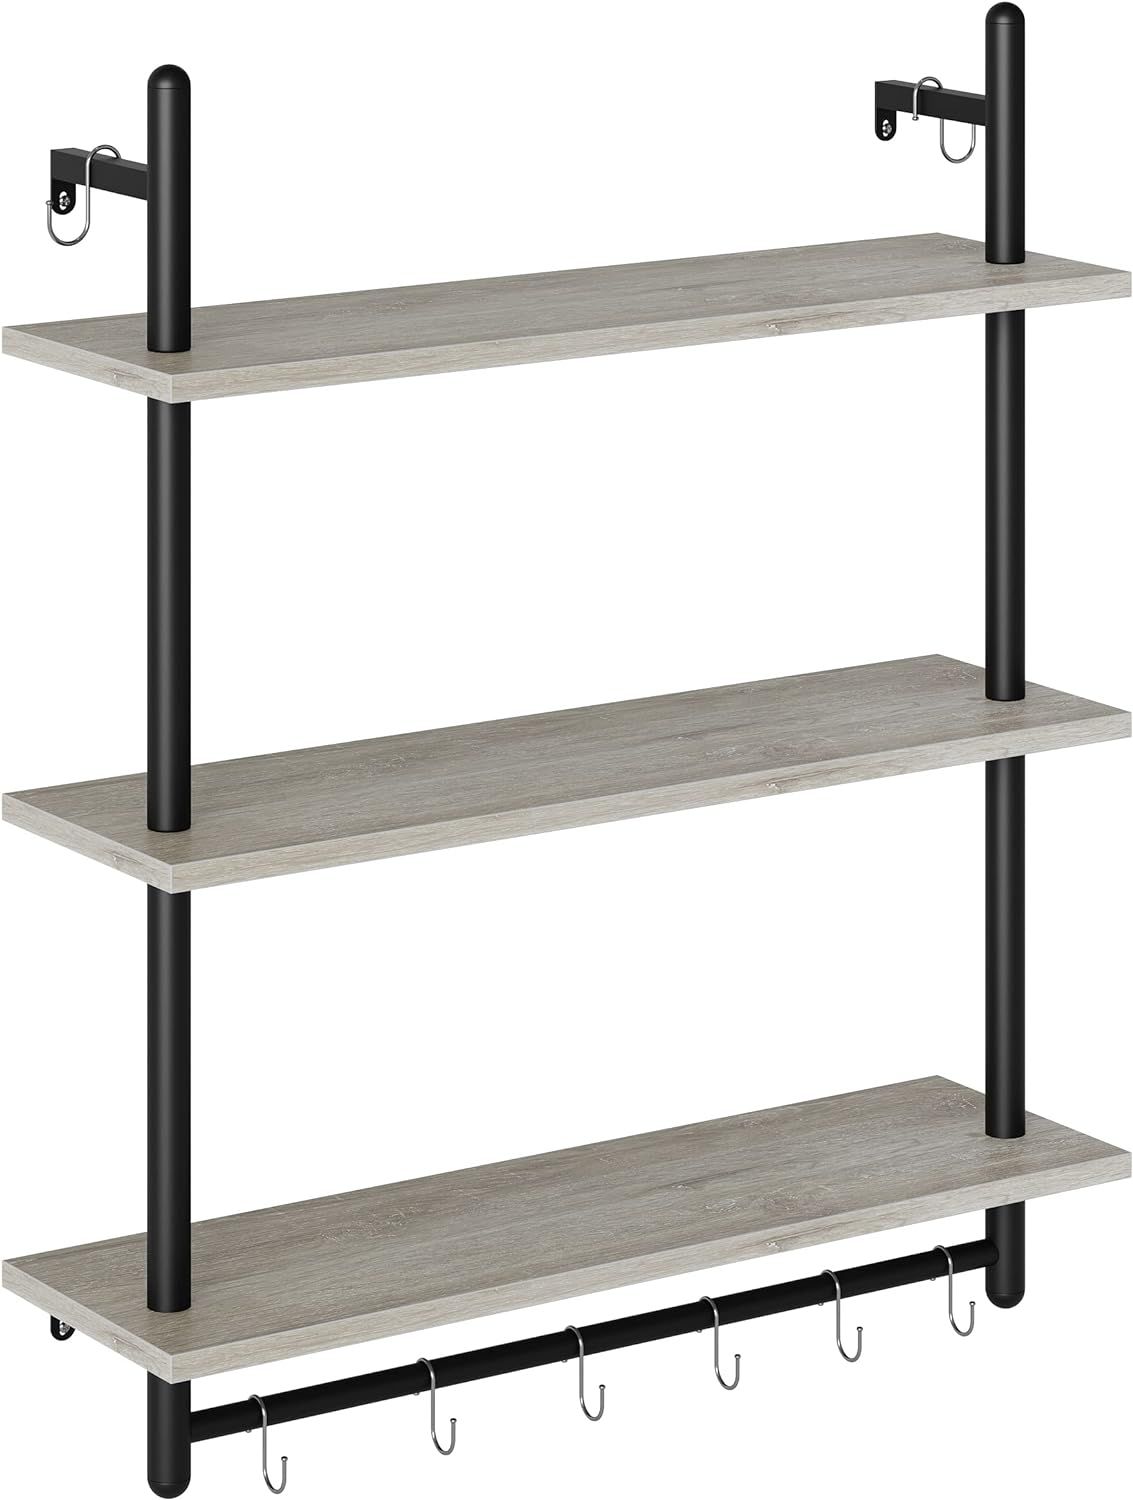 Bestier 3 Tier Industrial Pipe Shelving, Floating Book Shelves for Wall, Storage Hanging Shelves ... | Amazon (US)